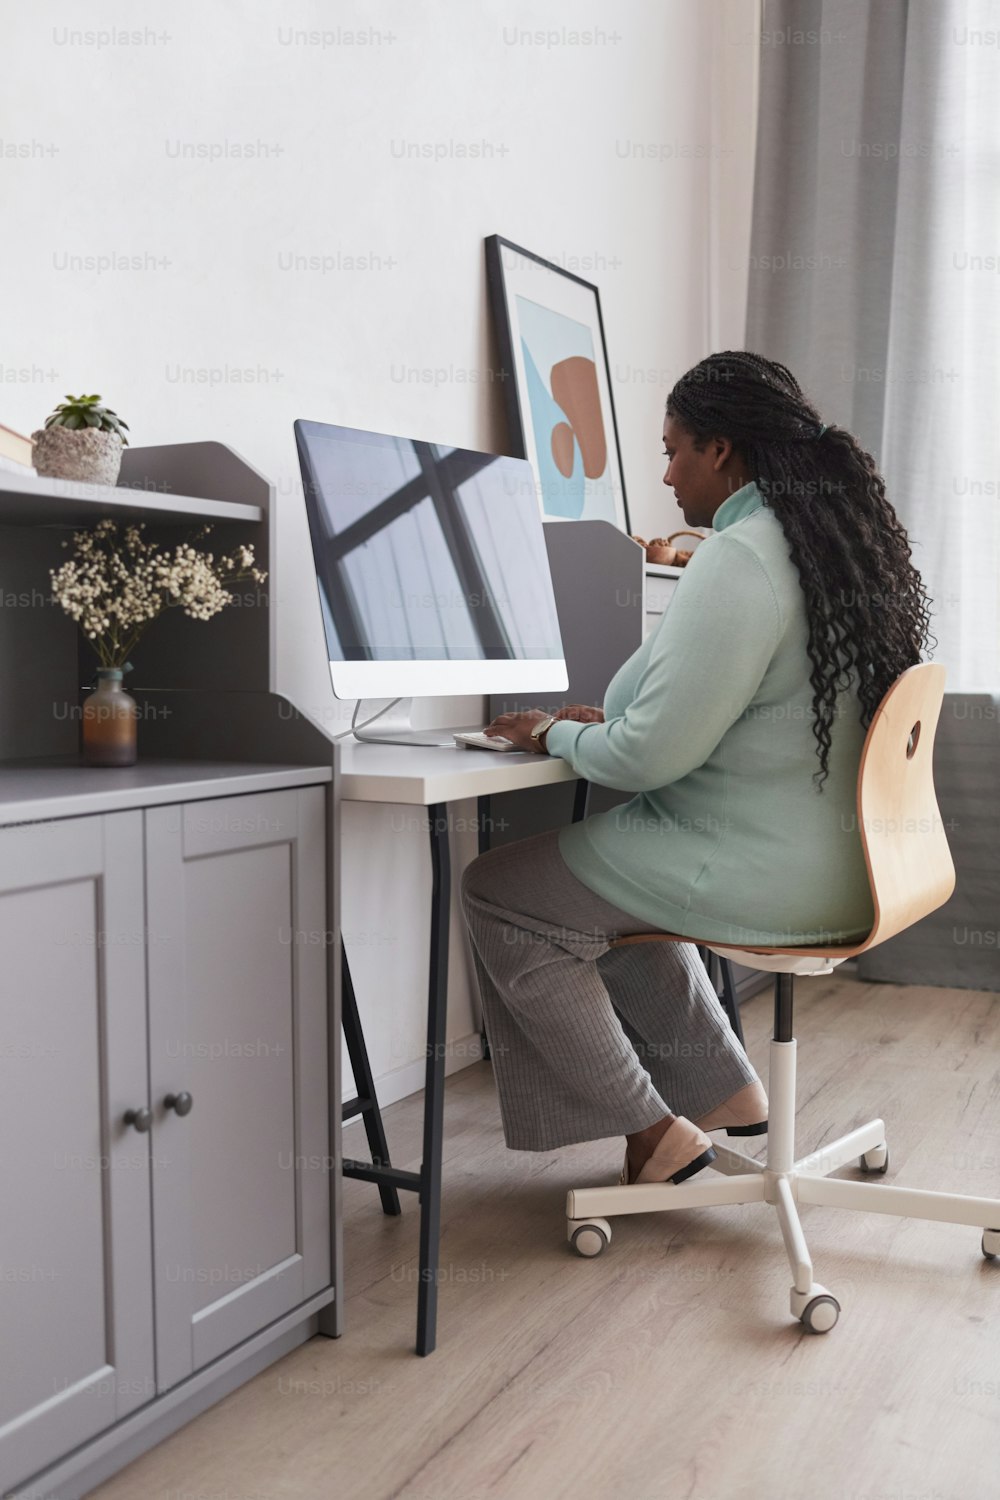 Vertical full length portrait of curvy African American woman using PC at desk and while enjoying work from home in minimal interior